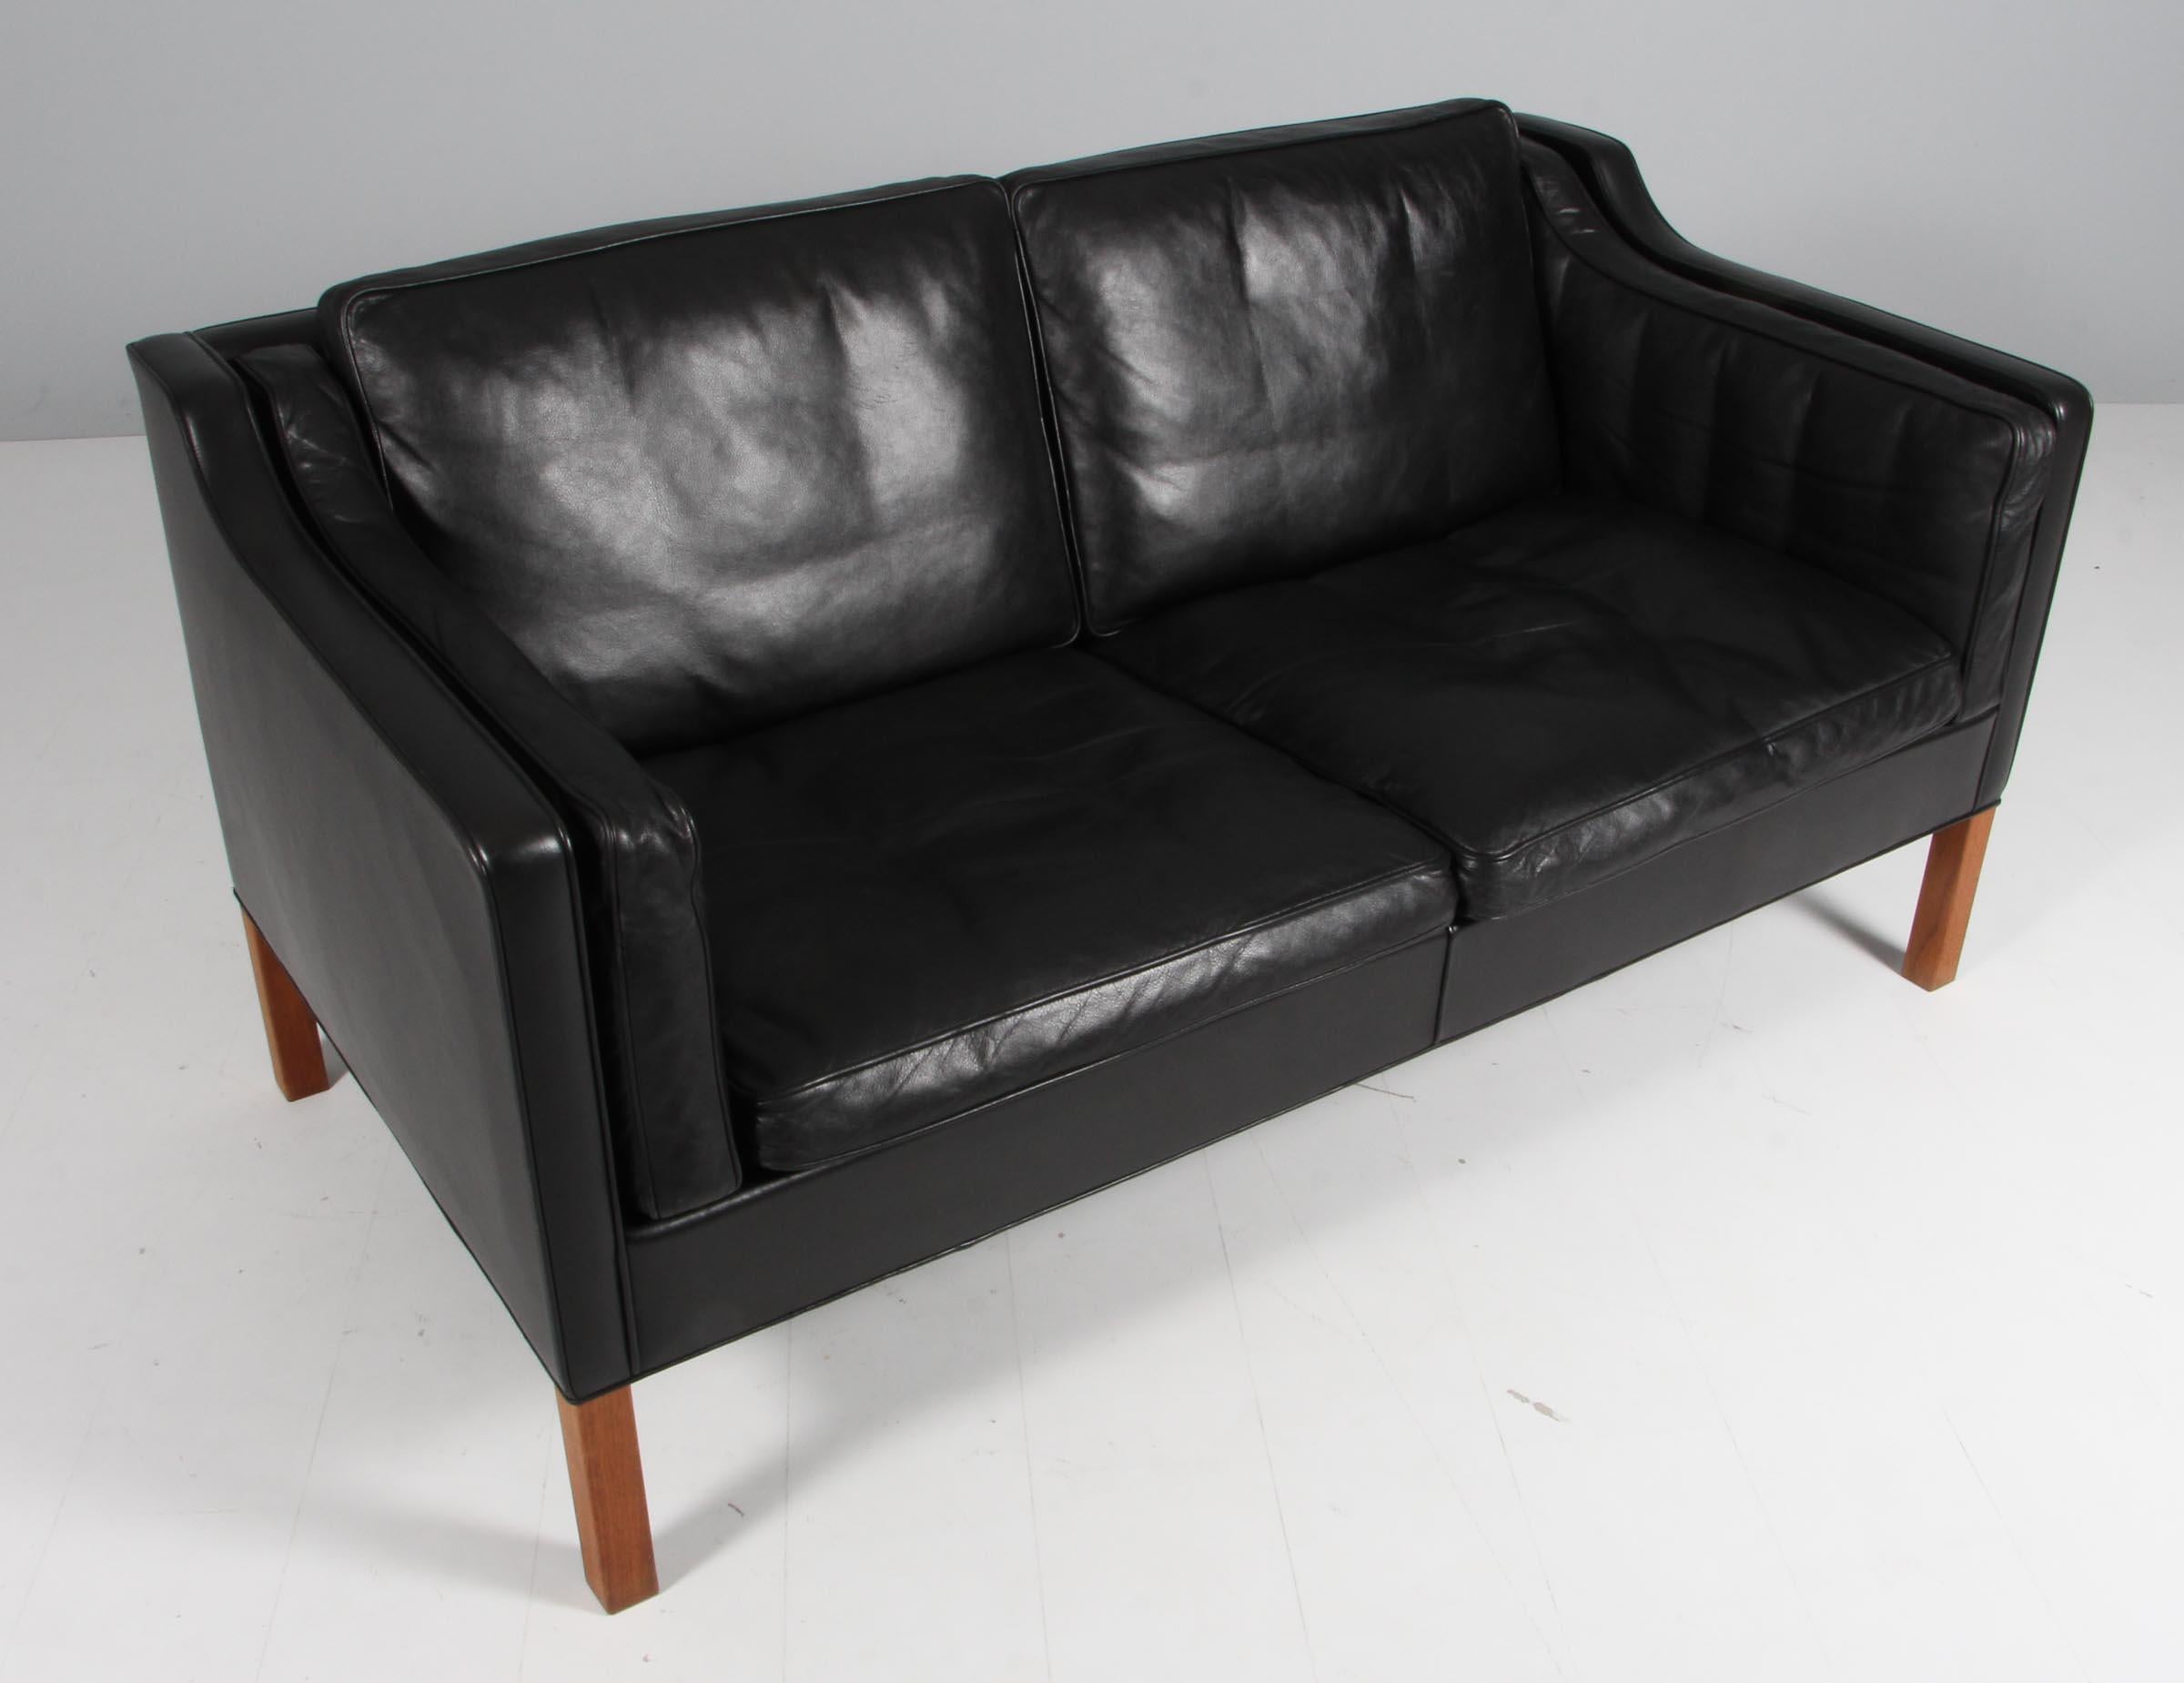 Børge Mogensen two-seat sofa with original patinated leather upholstery.

Legs of teak.

Model 2212, made by Fredericia Furniture.